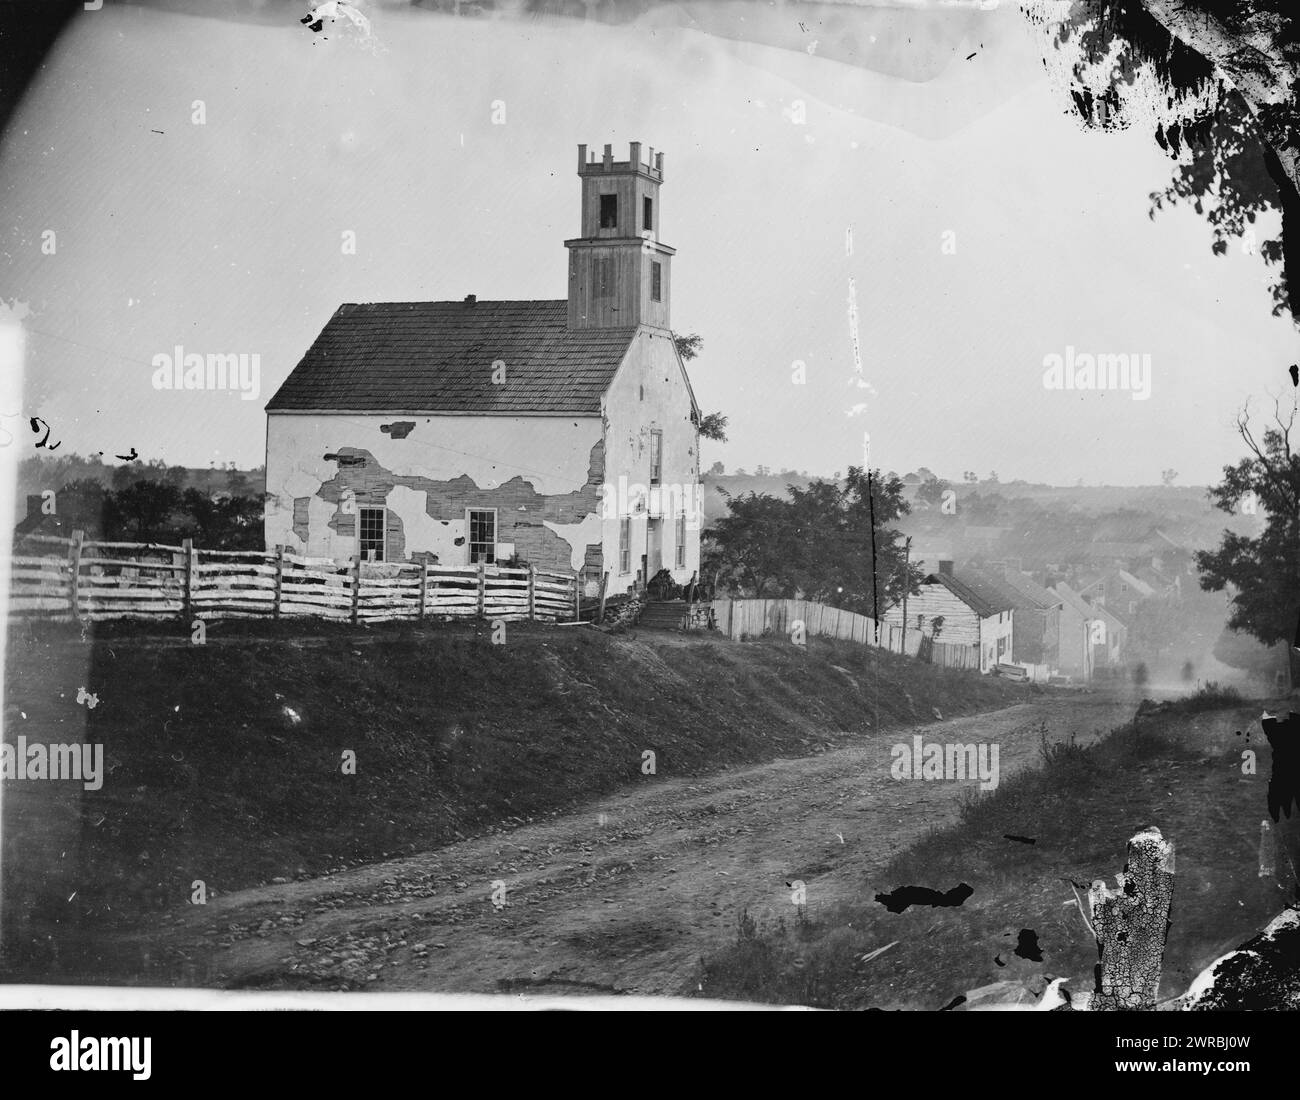 Sharpsburg, Md. Lutheran church, Photograph from the main eastern theater of the war, Battle of Antietam, September-October 1862., Gardner, Alexander, 1821-1882, photographer, 1862 September., United States, History, Civil War, 1861-1865, Glass negatives, 1860-1870, Stereographs, 1860-1870, 1 negative: glass, stereograph, wet collodion, 4 x 10 in Stock Photo